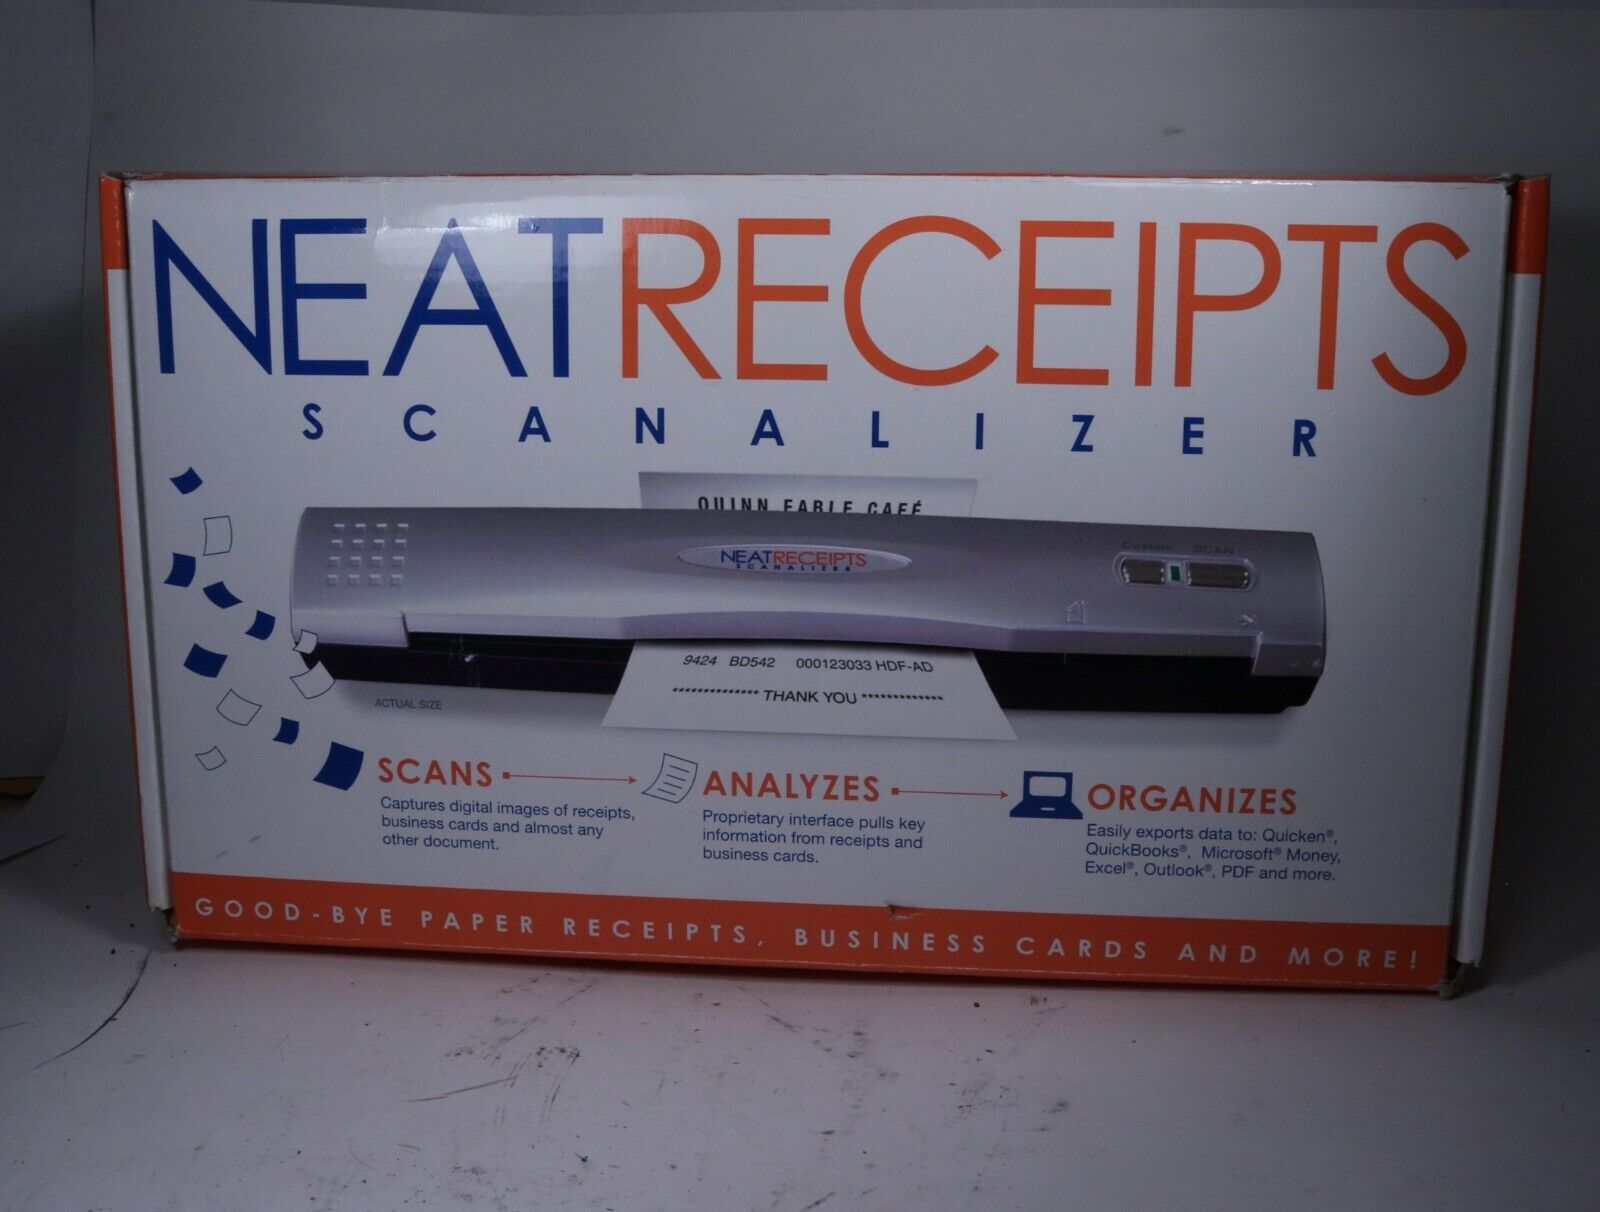 Neat Receipts Scanalizer with Box, Cords, CD, etc. as shown